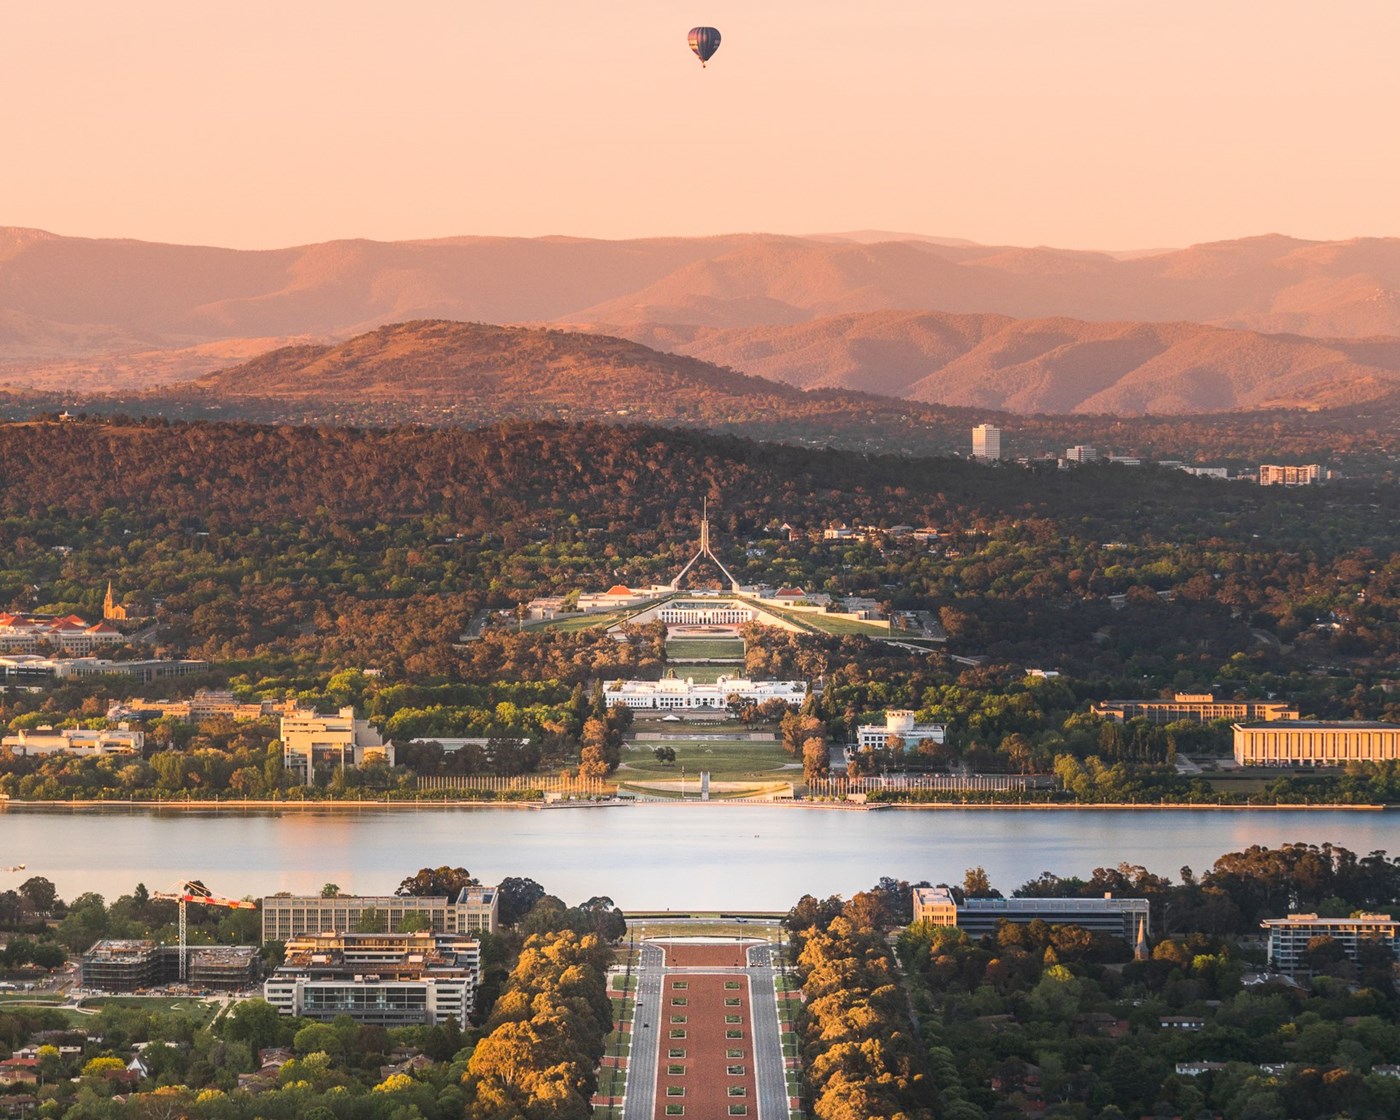 The aerial view of Canberra at sunset, showing Parliament House.